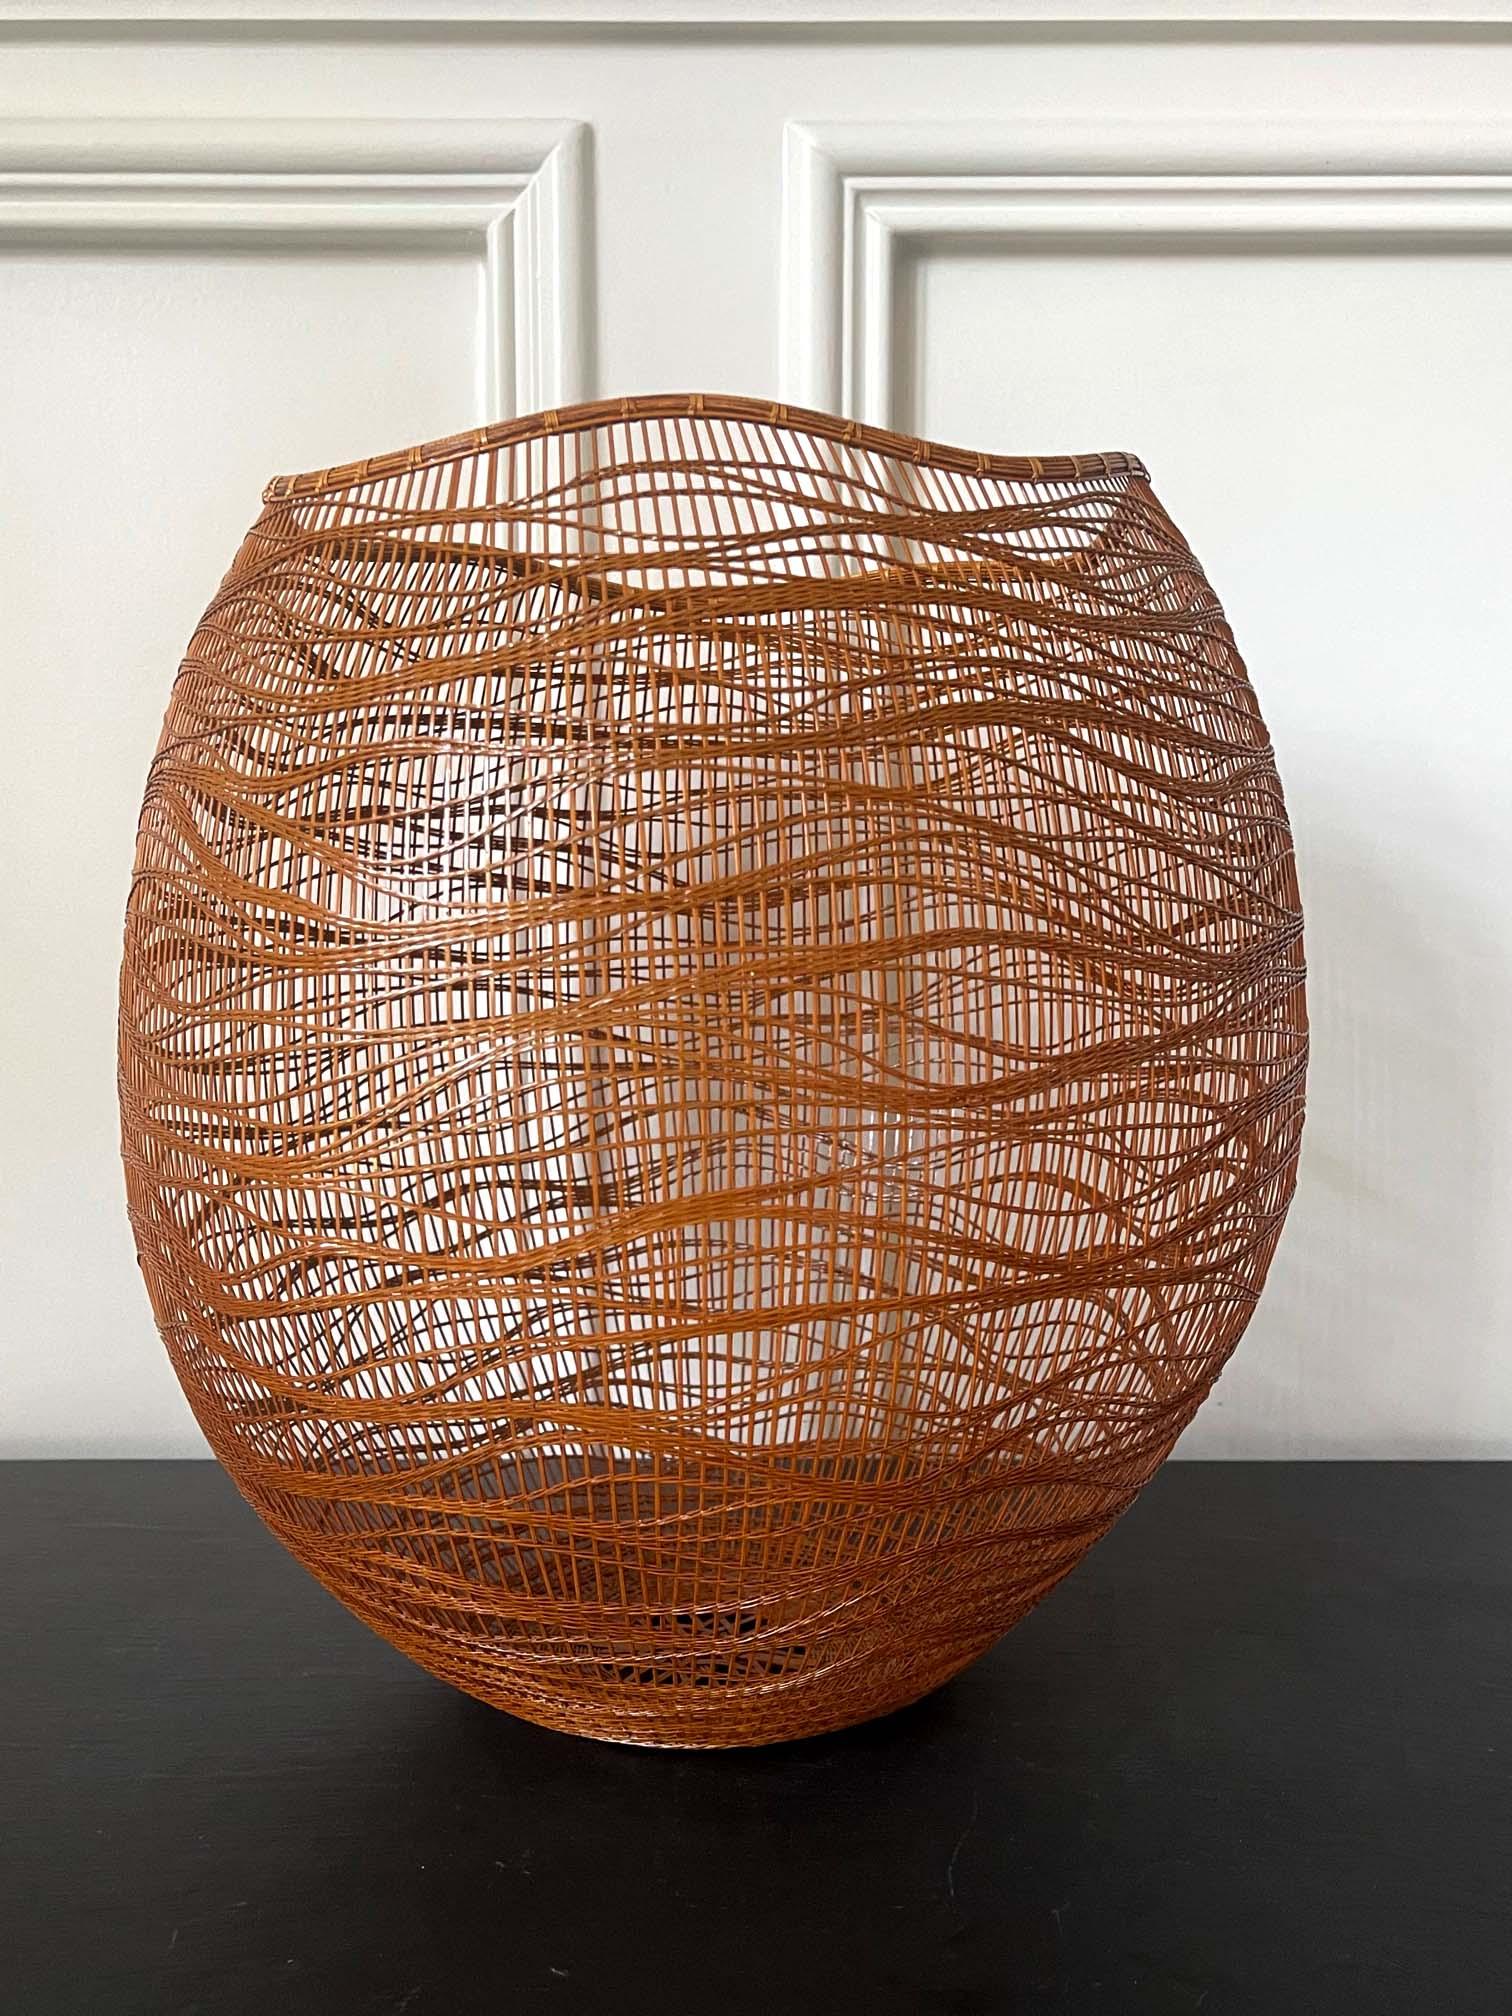 A wonderful woven bamboo basket with a sculptural form hand crafted by Japanese Bamboo Artist Morigami Jin (born 1955-). It was constructed with split Madake bamboo strips and rattan fiber, using free hand twining and wrapping techniques.